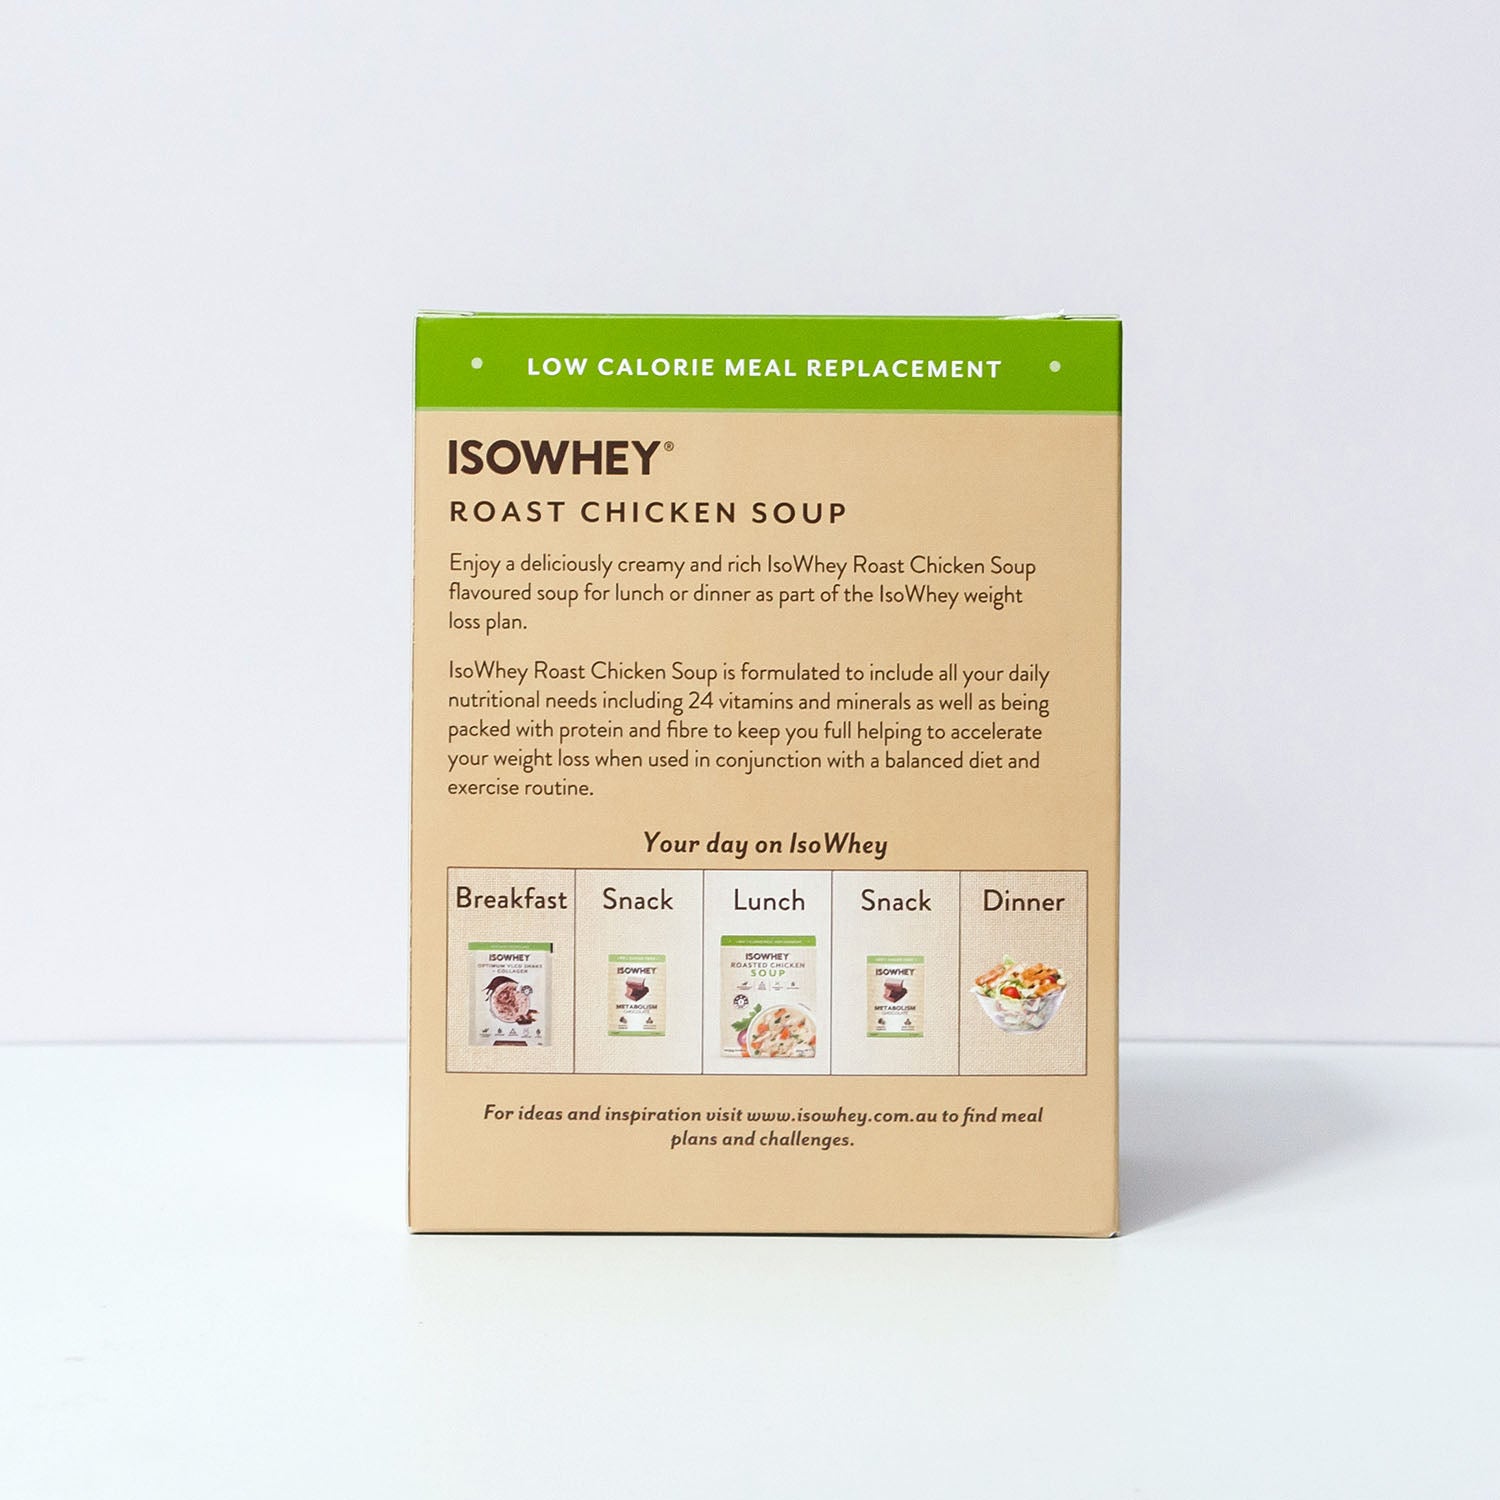 IsoWhey Chicken Soup with text details